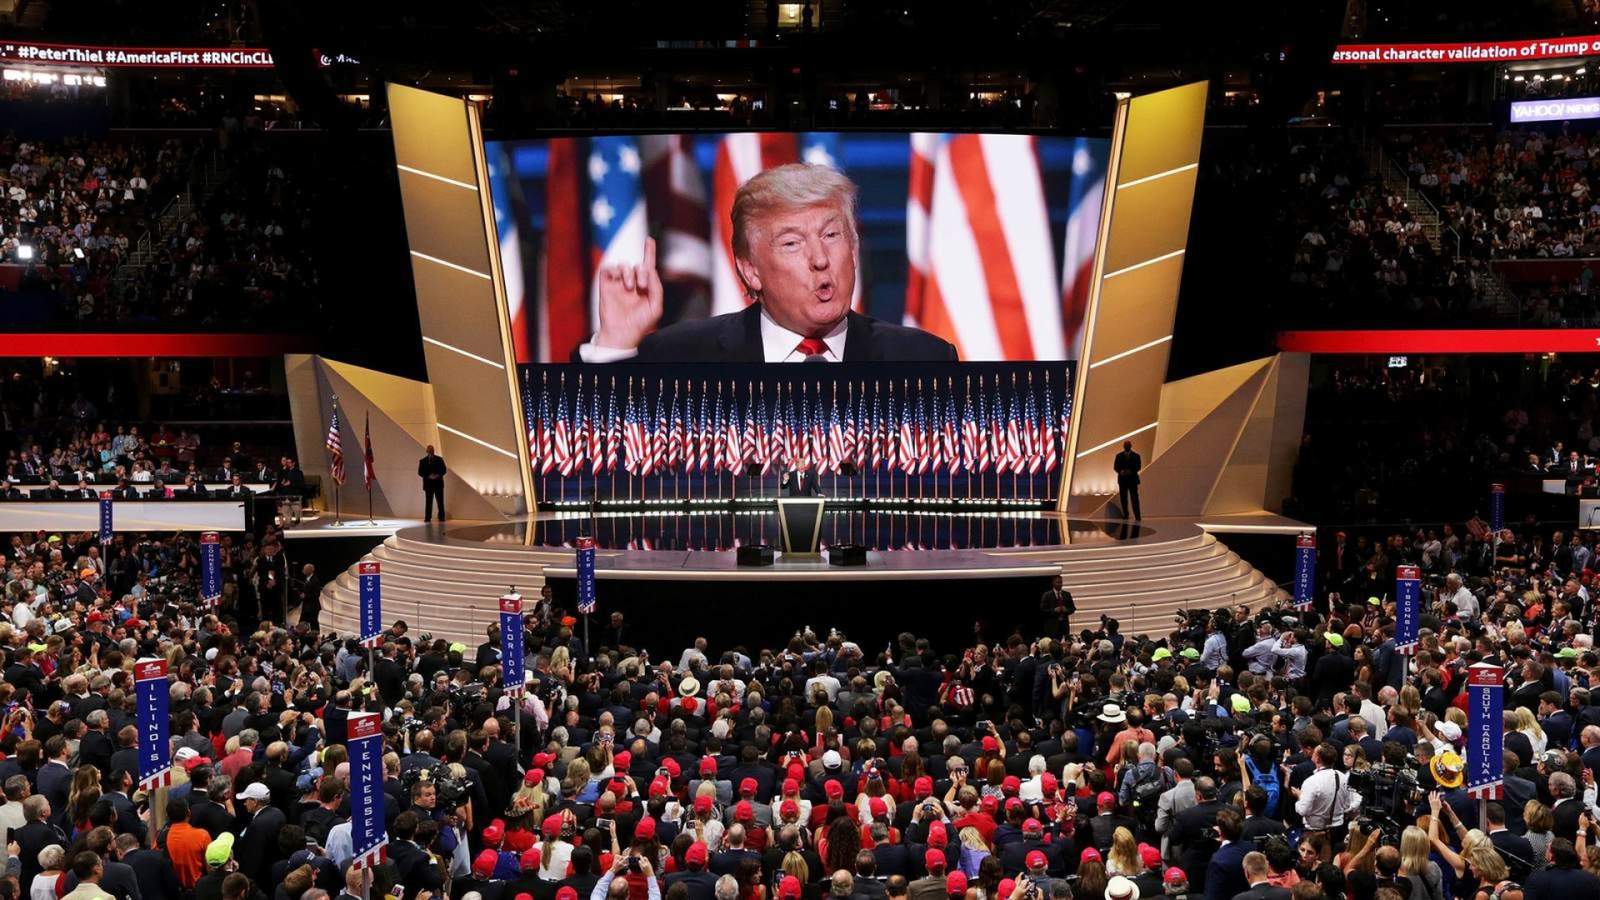 It’s official: Jacksonville to host Republican National Convention in 2020